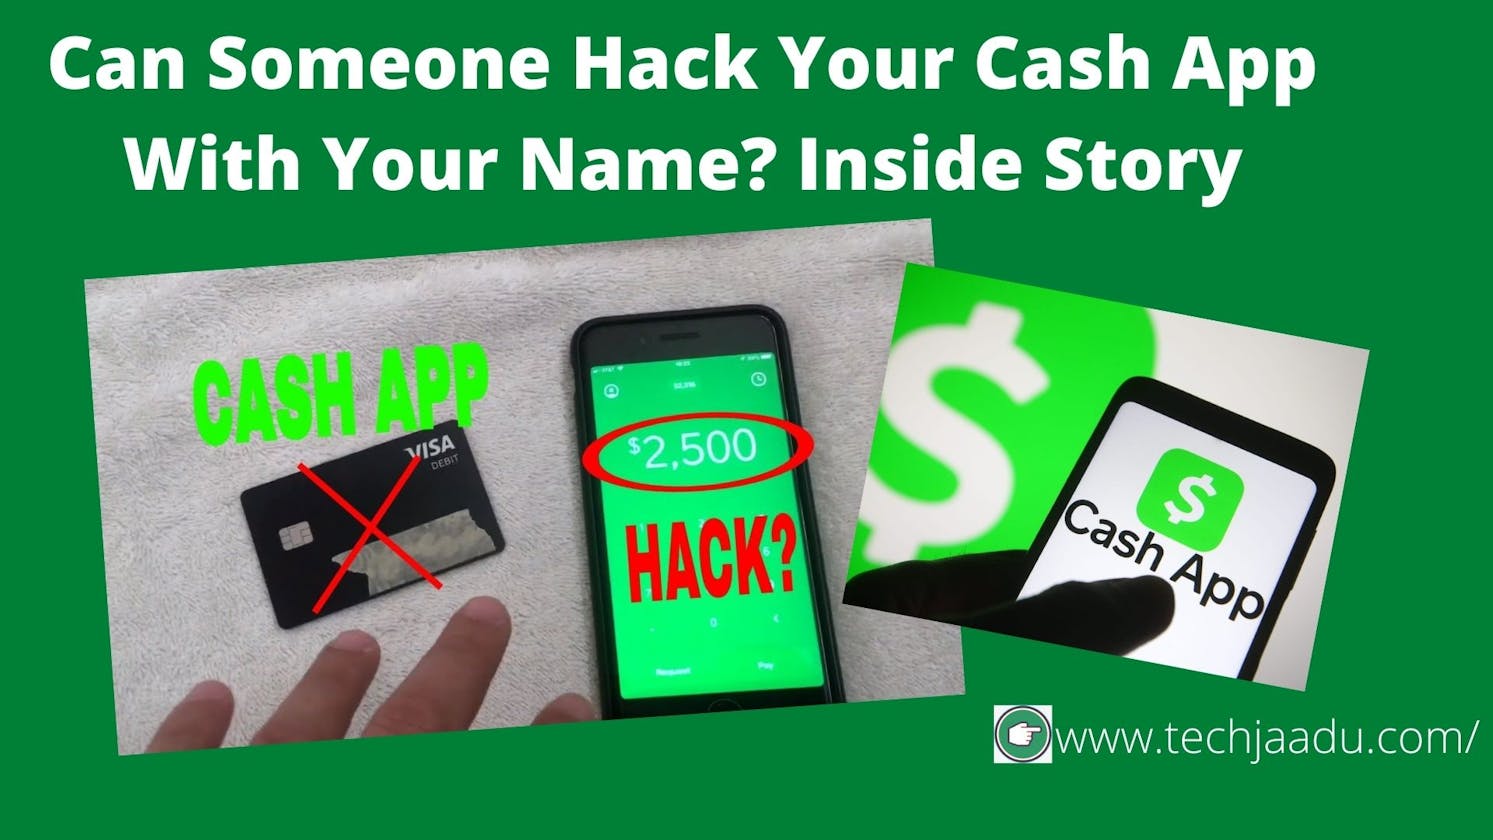 Can Someone Hack Your Cash App With Your Name? Inside Story